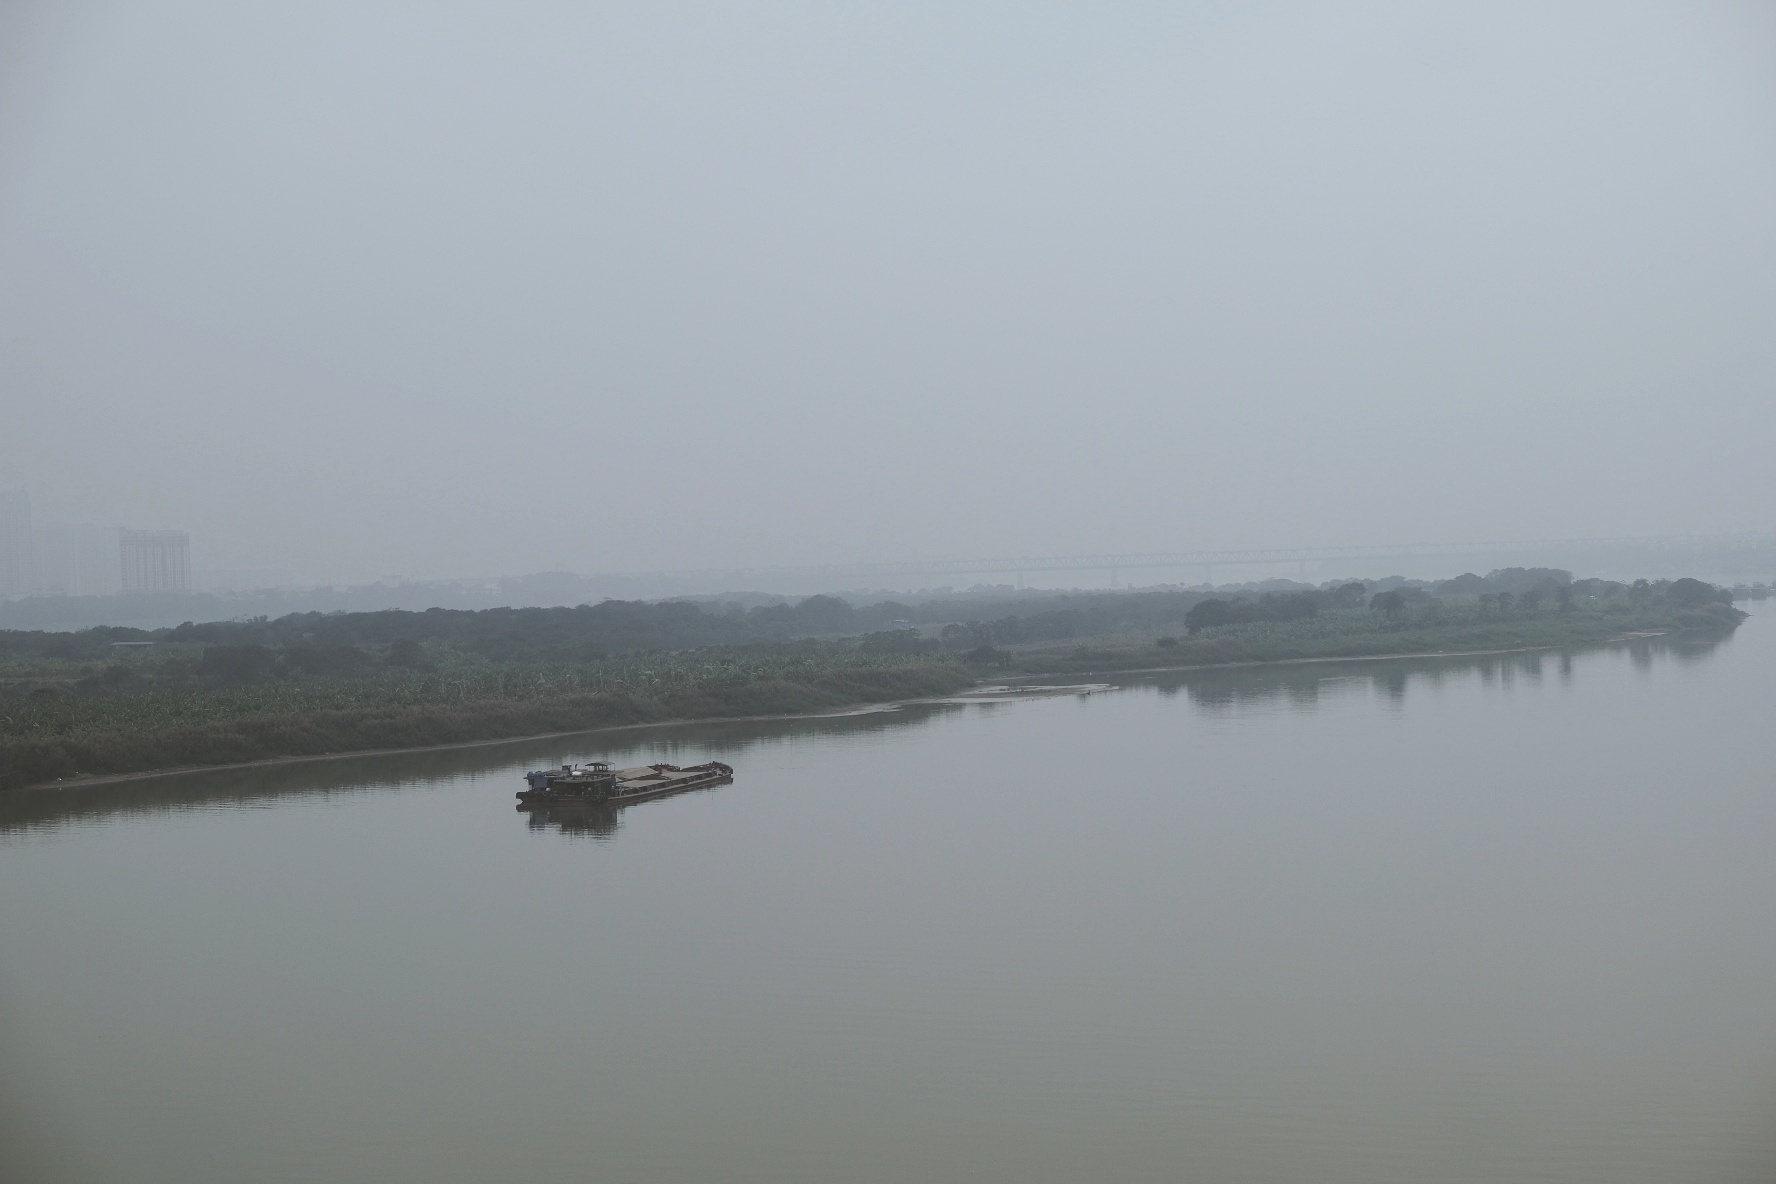 The view of the red river (and delta) from the highway bridge. Again, foggy. Sky and water merge. There's a boat floating, carrying sand of sorts 